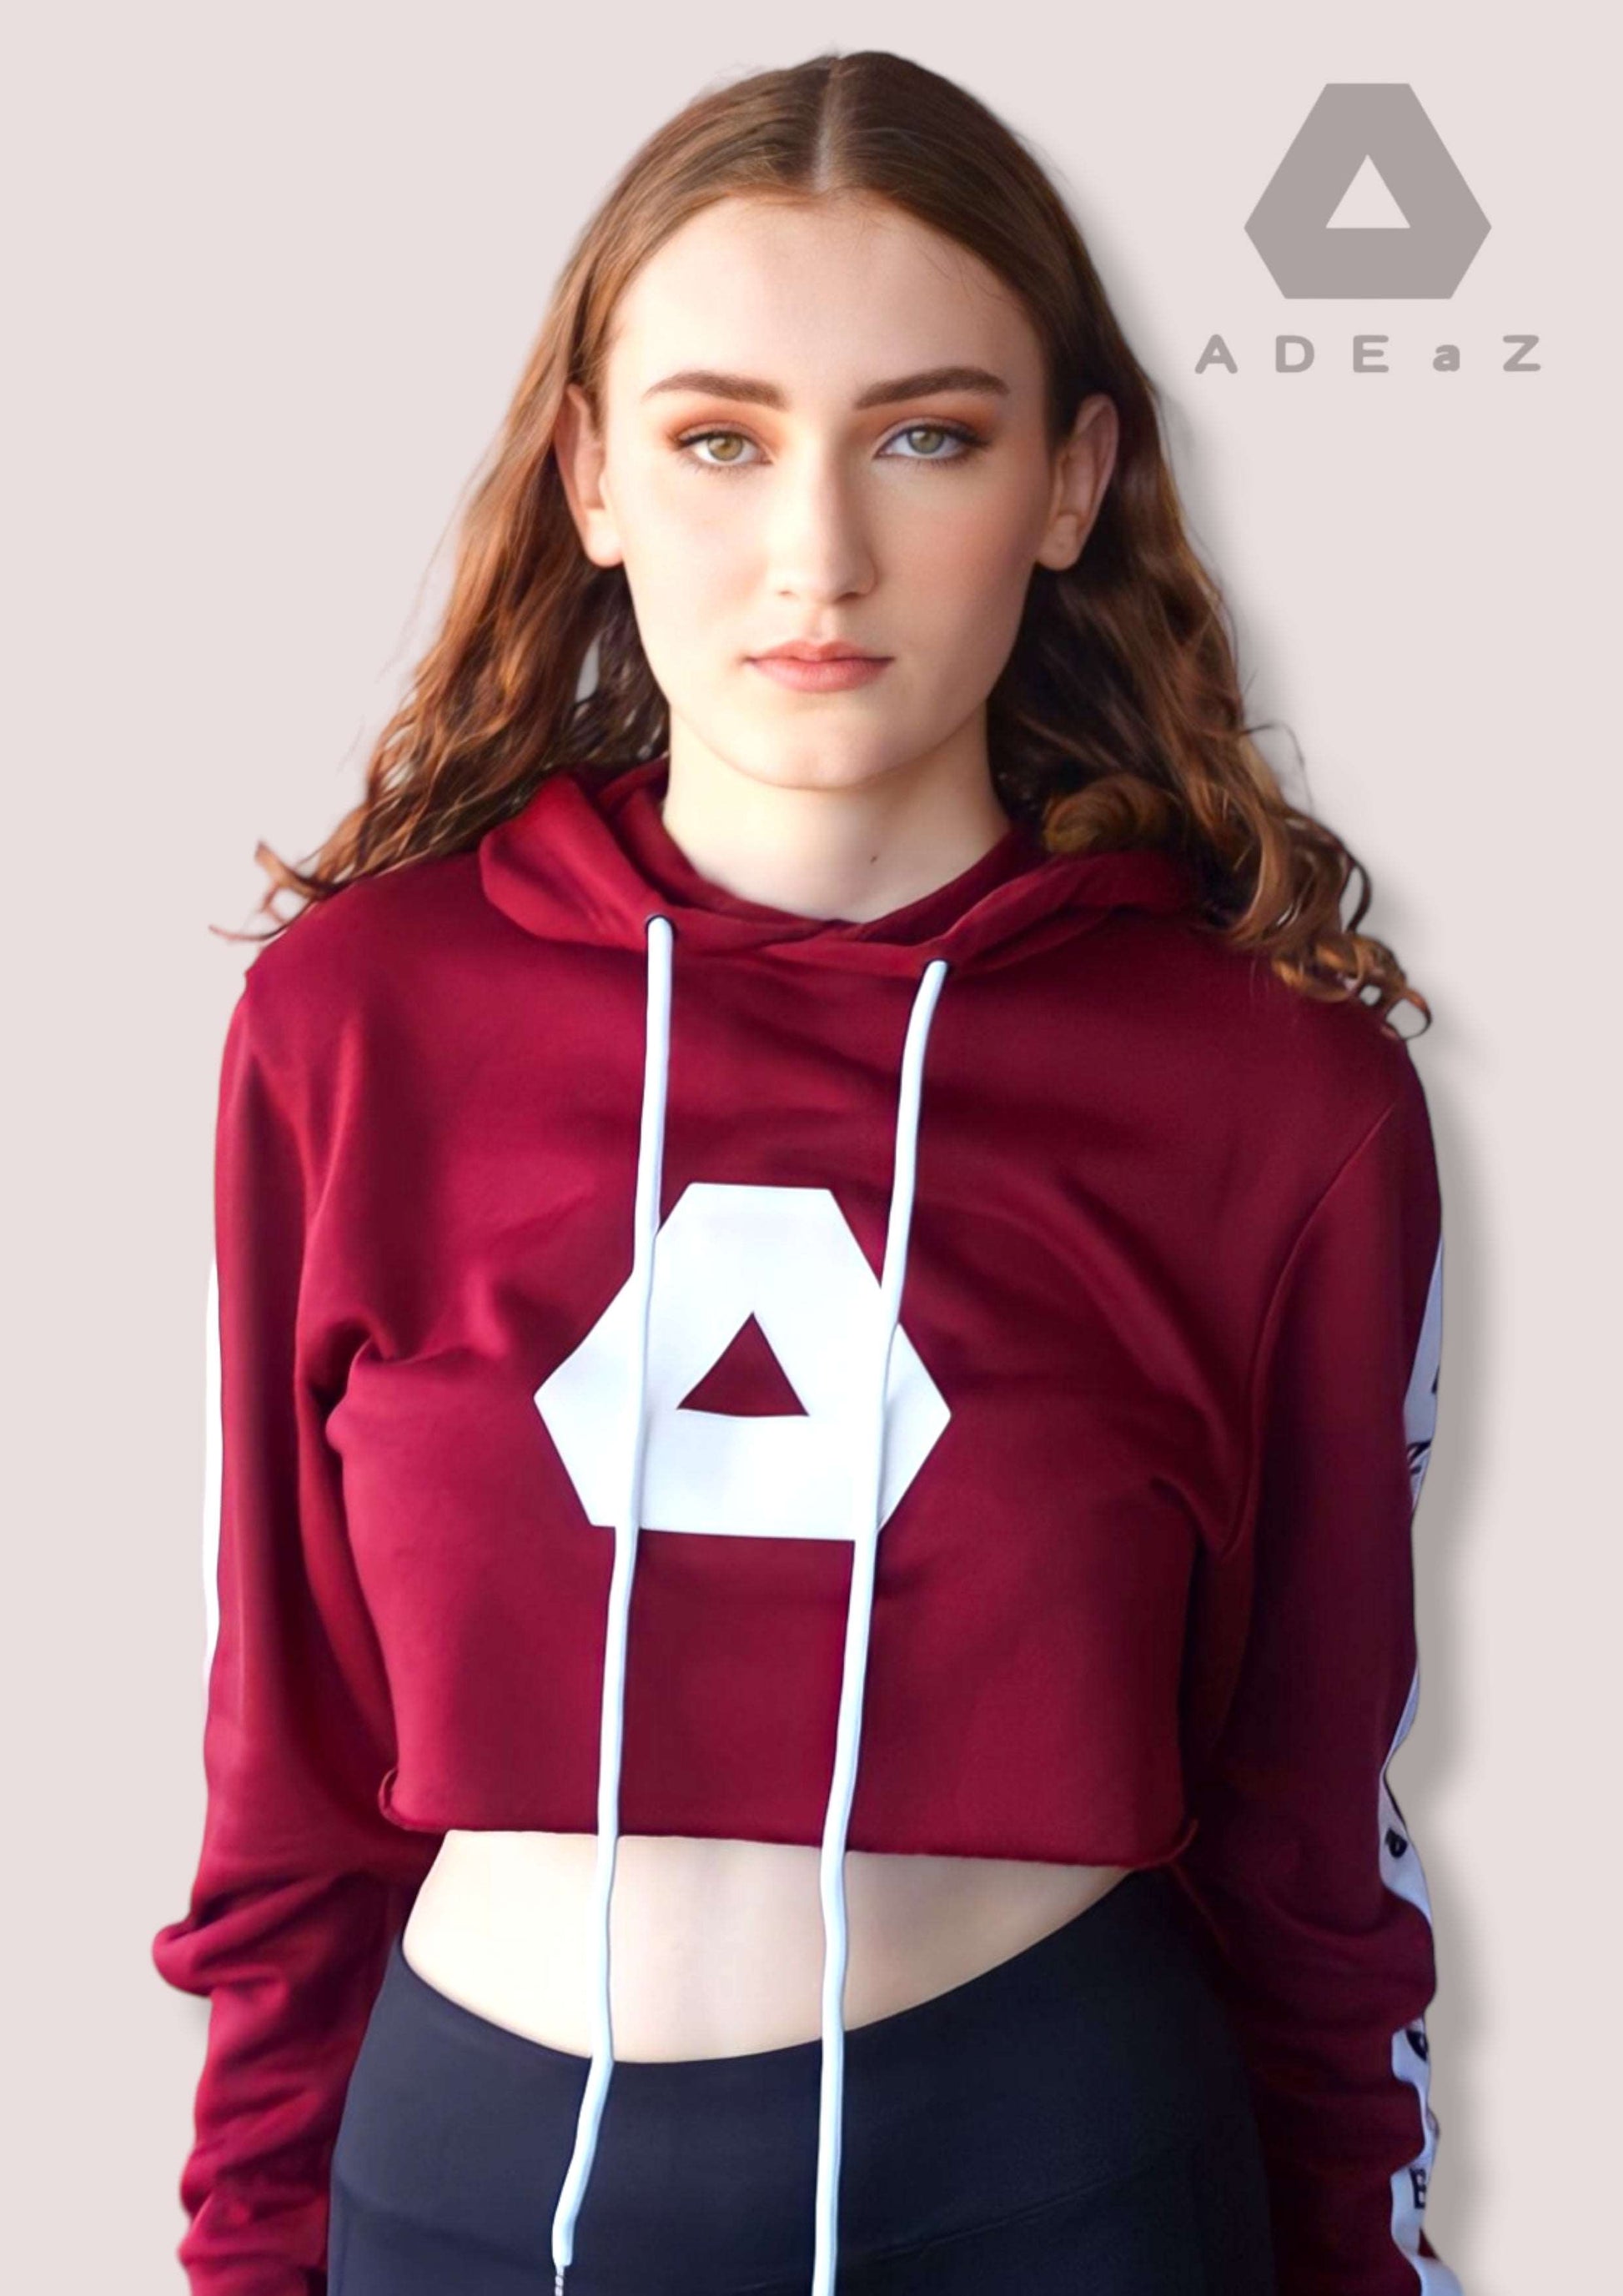  long-sleeve hoodie crop top with drawstrings, combining comfort and style in a fashionable ensemble